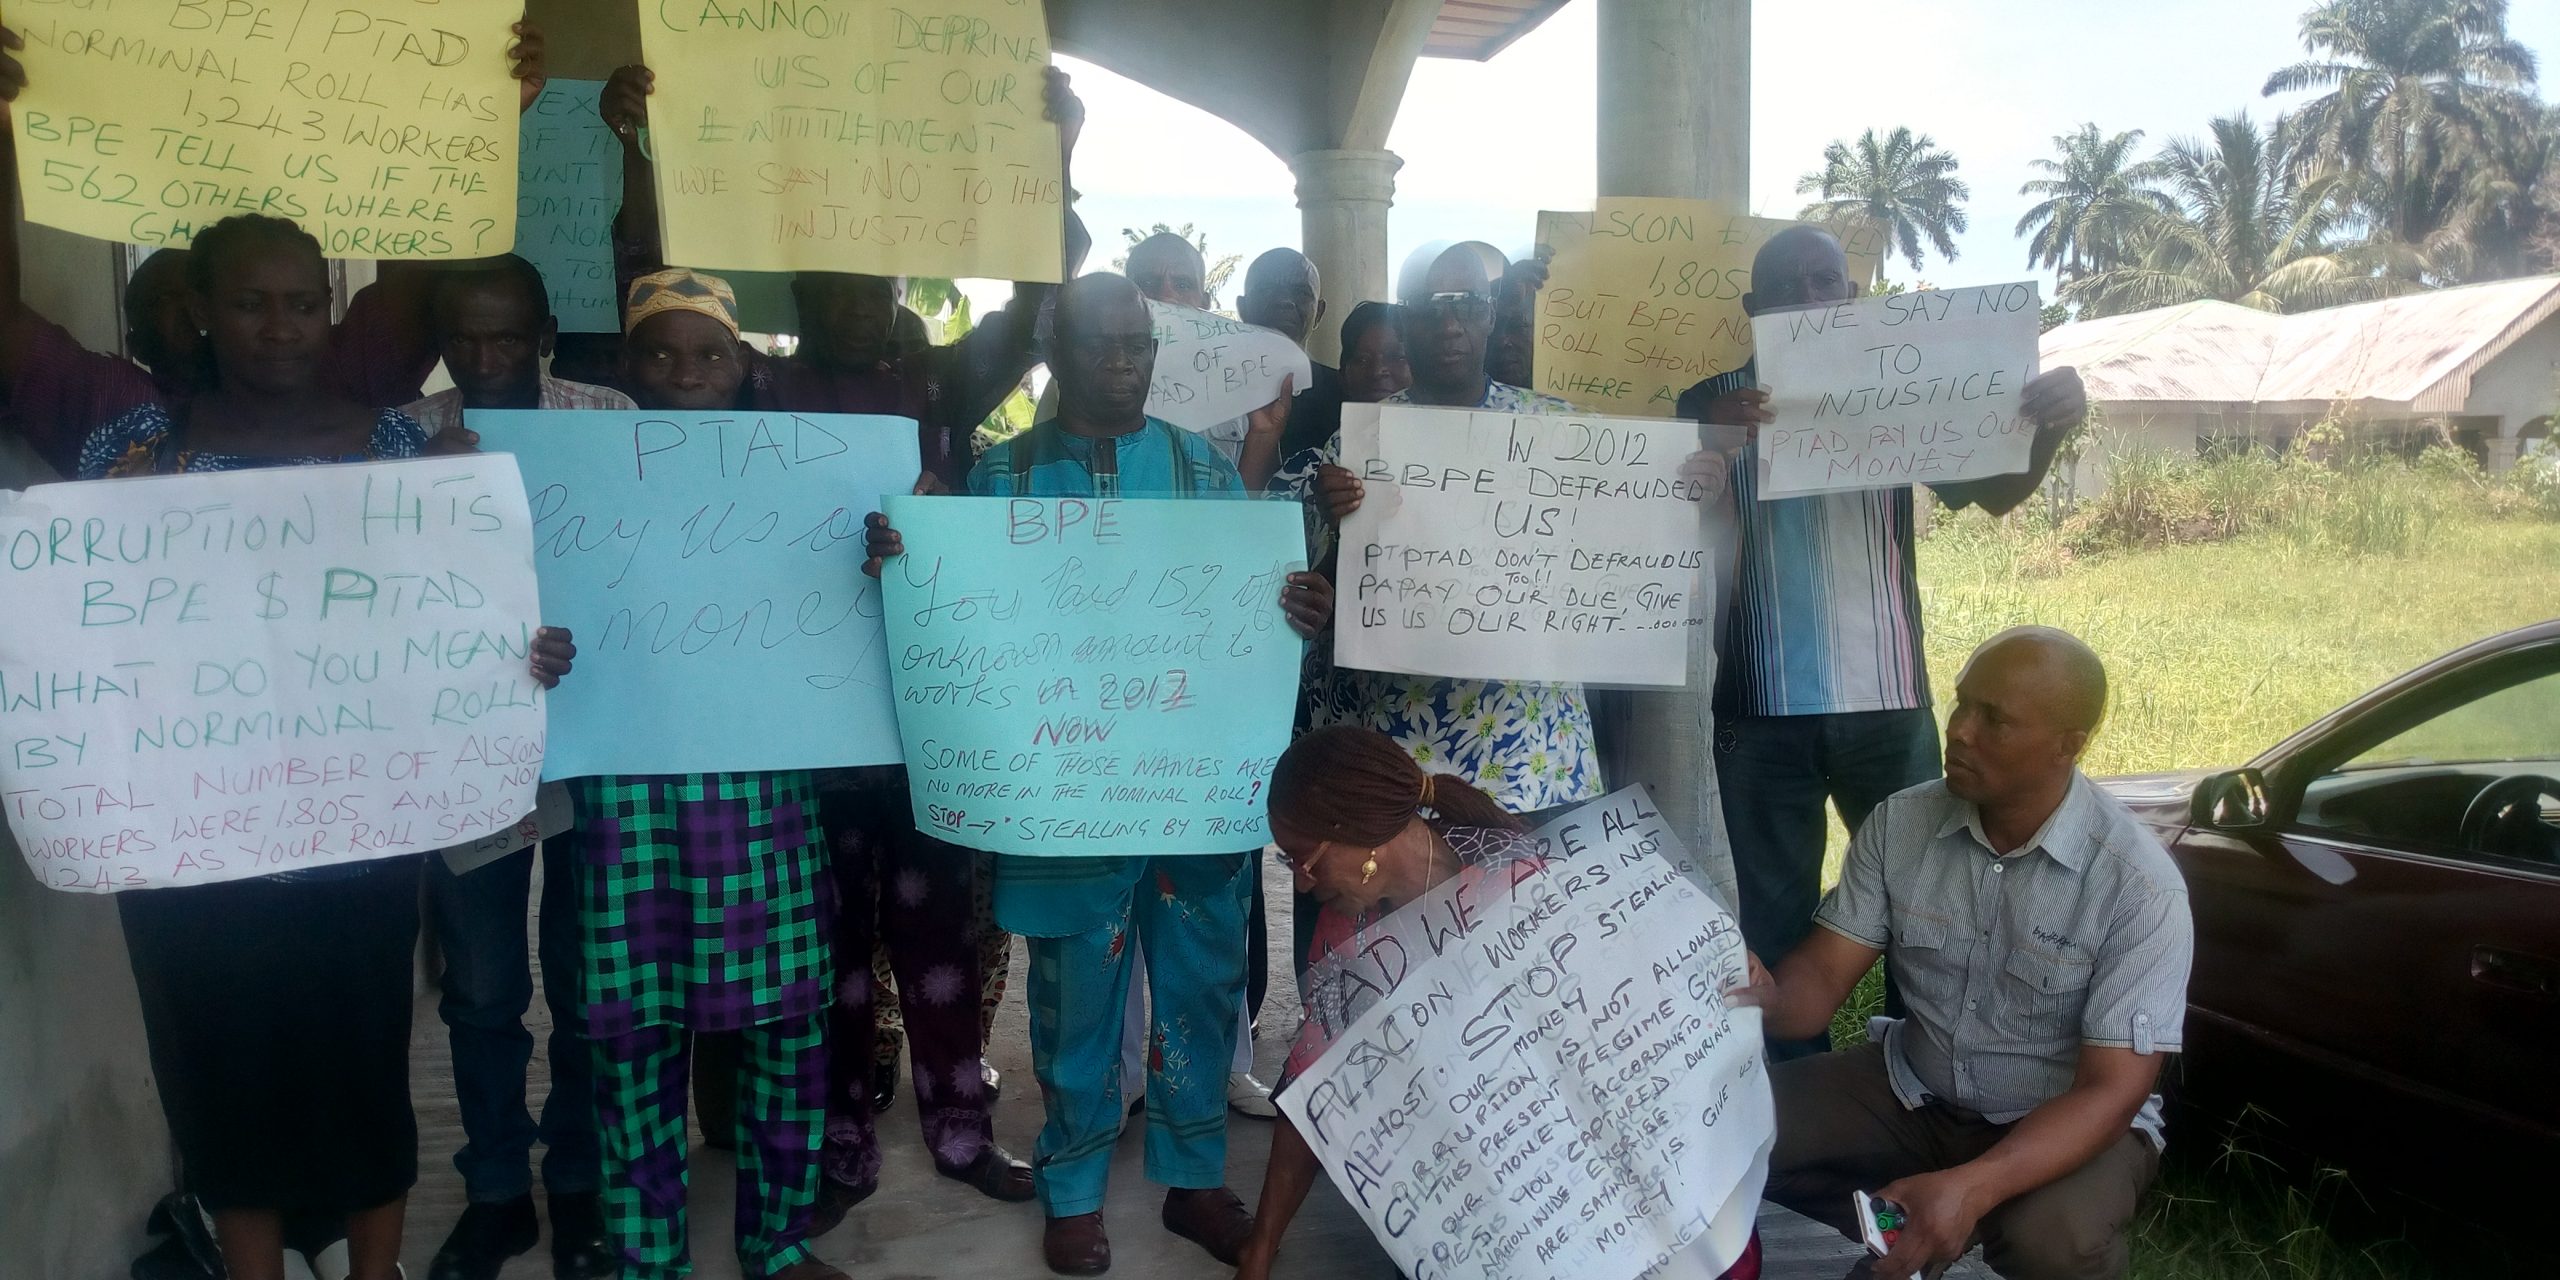 ex alscon workers protest threaten to sue bpe ptad over severance entitlements